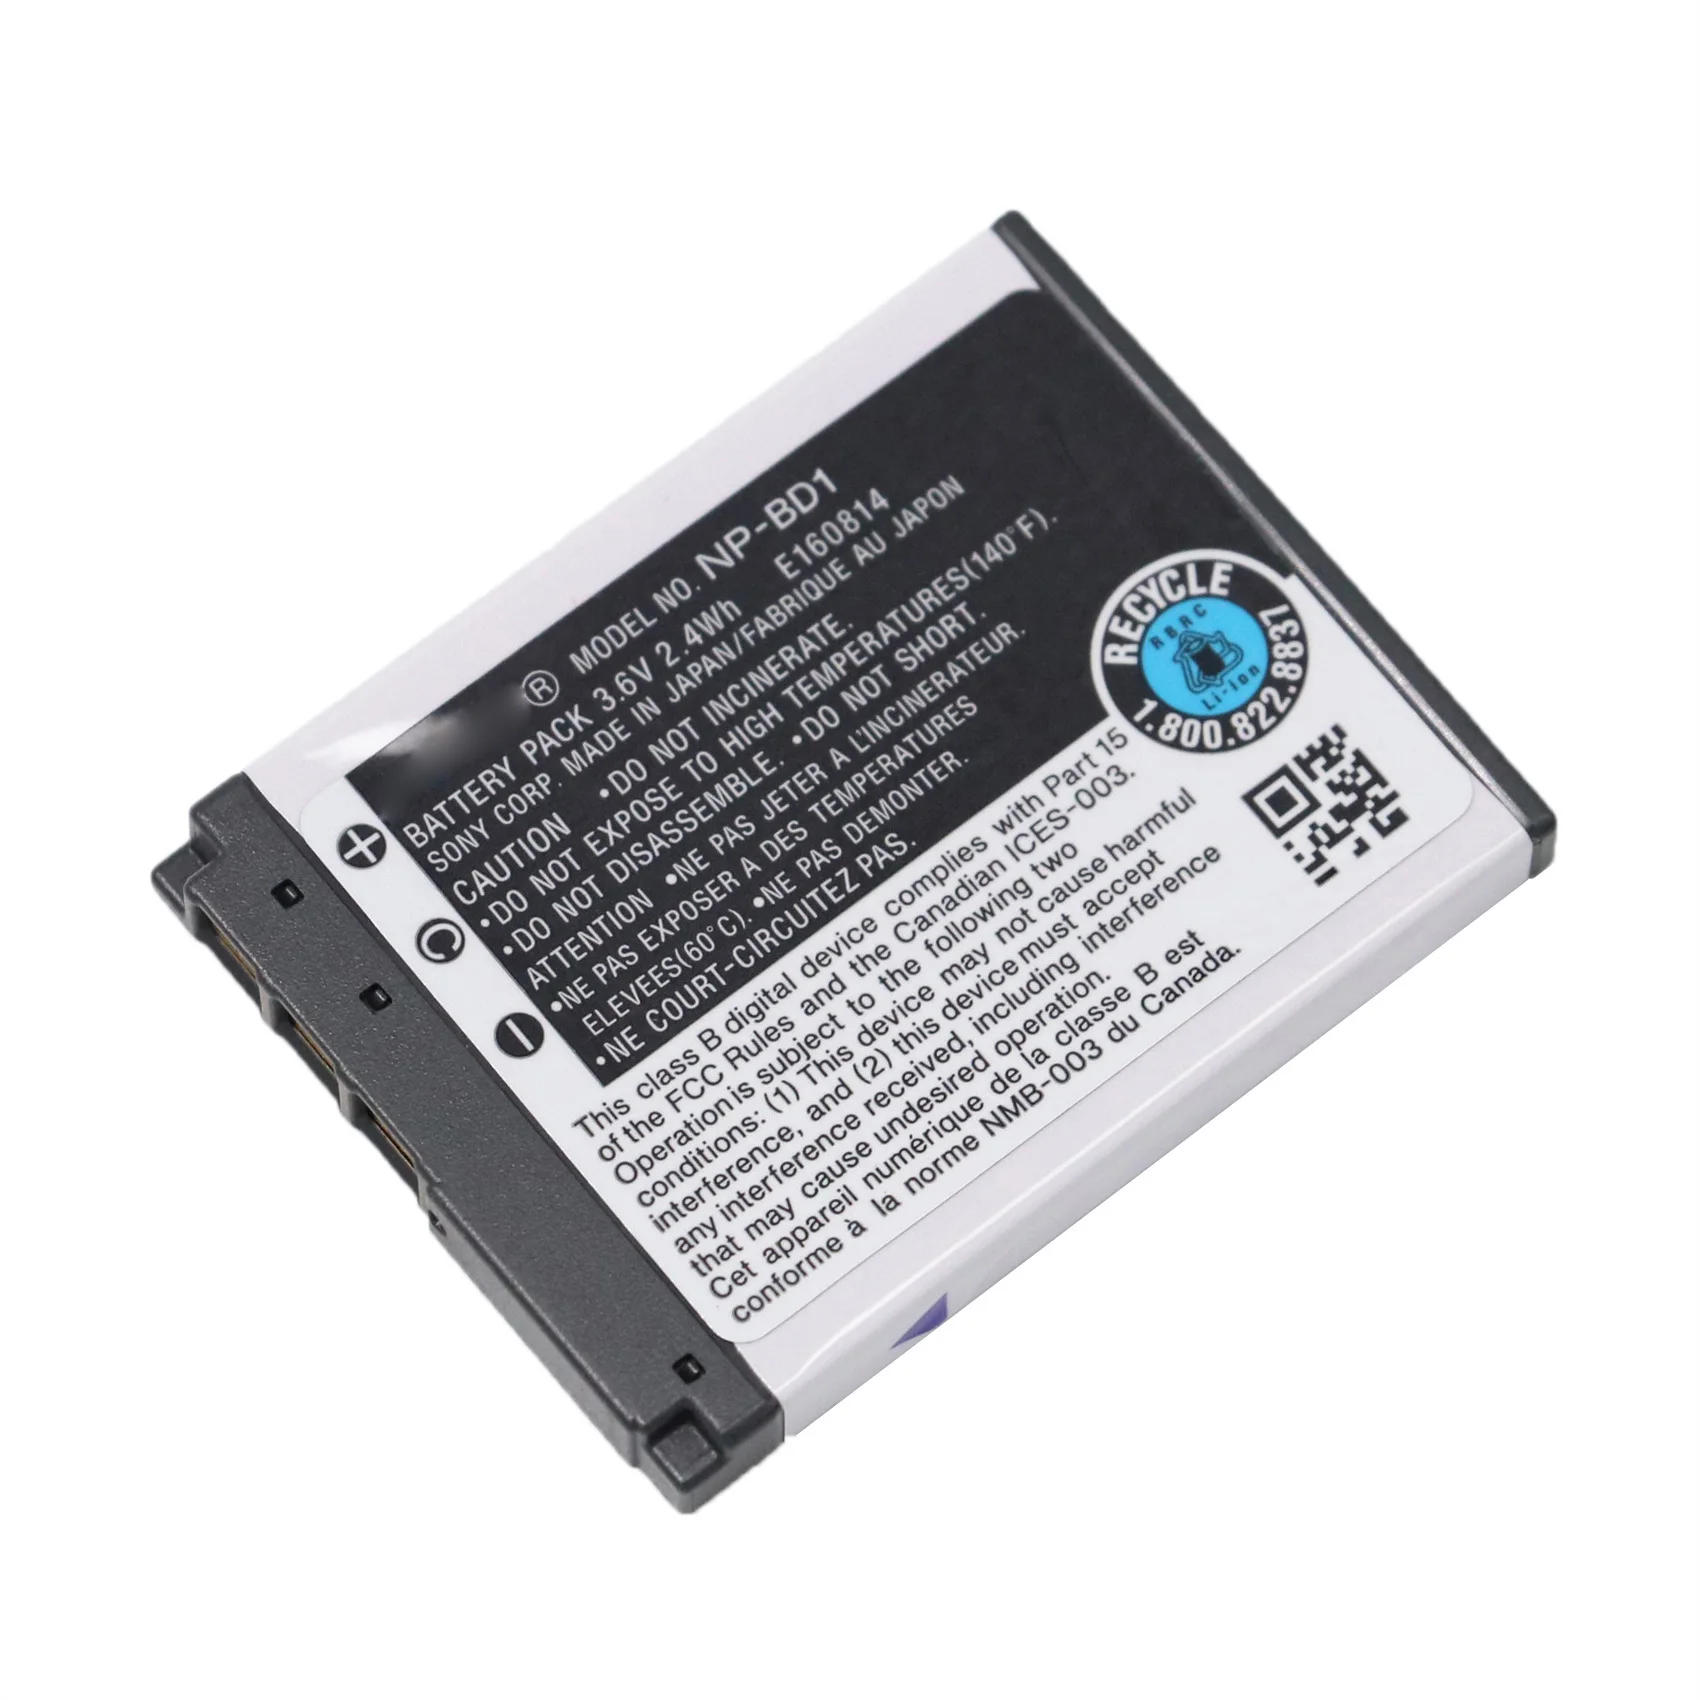 

high-performance NP-BD1 Battery for SONY DSC-T900 T700 T500 T300 T200 T90 T77 T75 T70 T2 G3 TX1 Camera